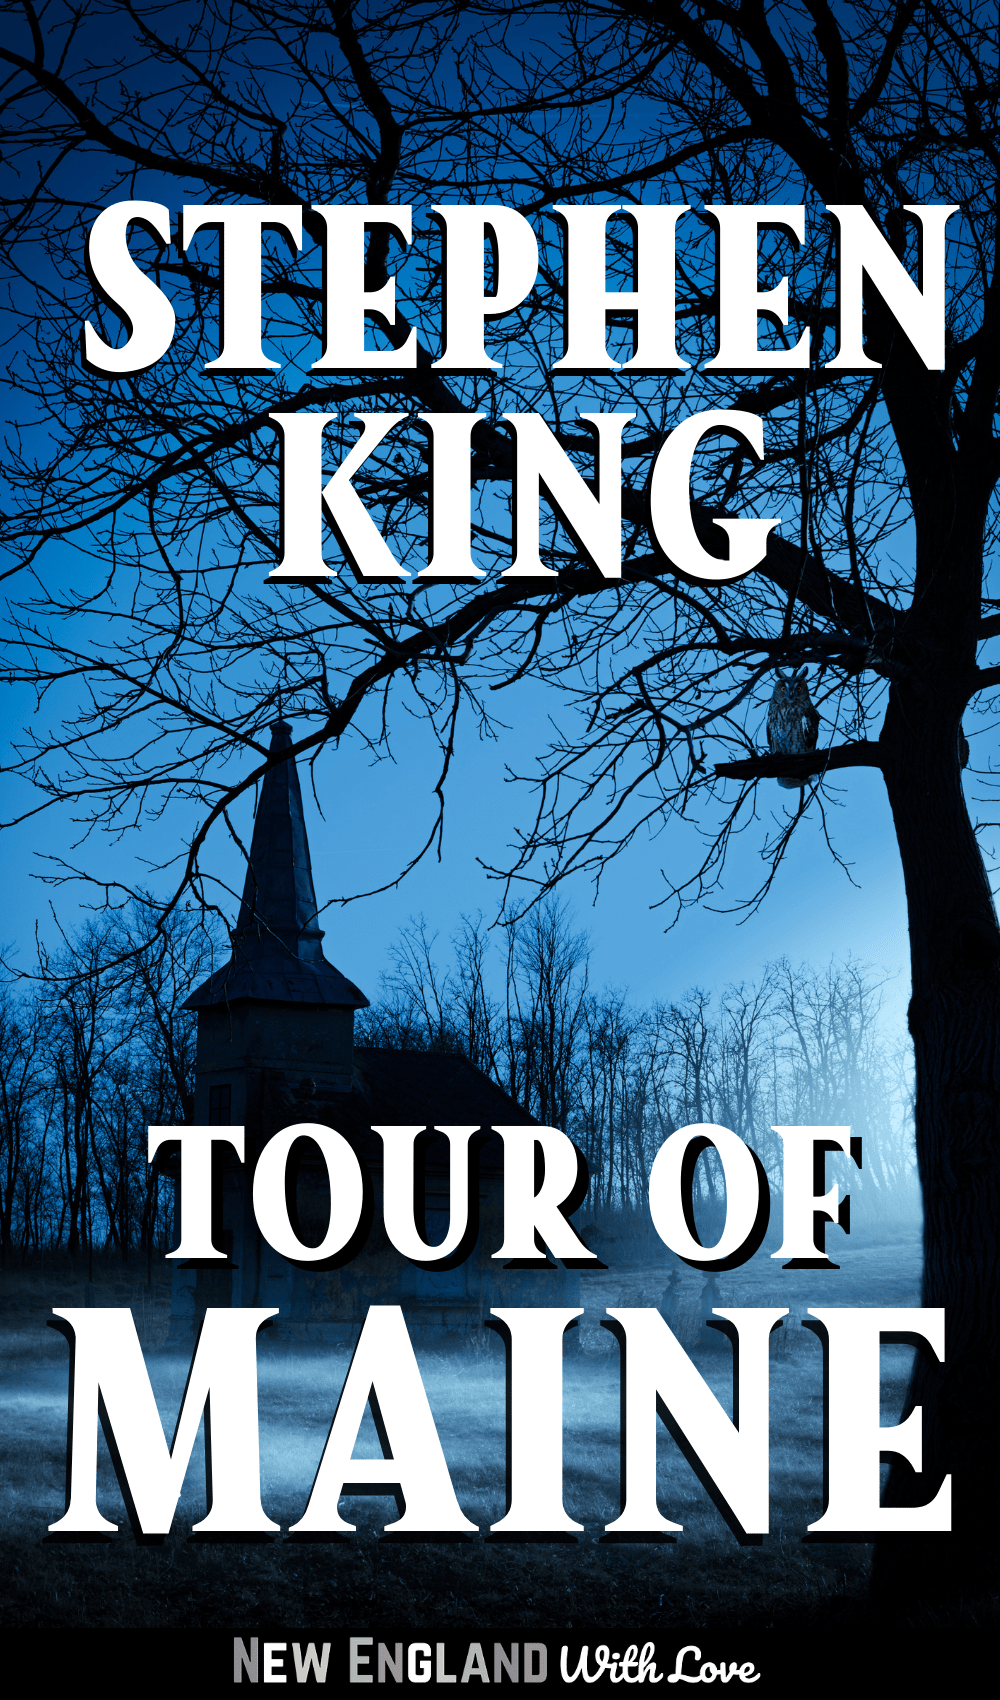 Pinterest graphic reading "Stephen King Tour of Maine"